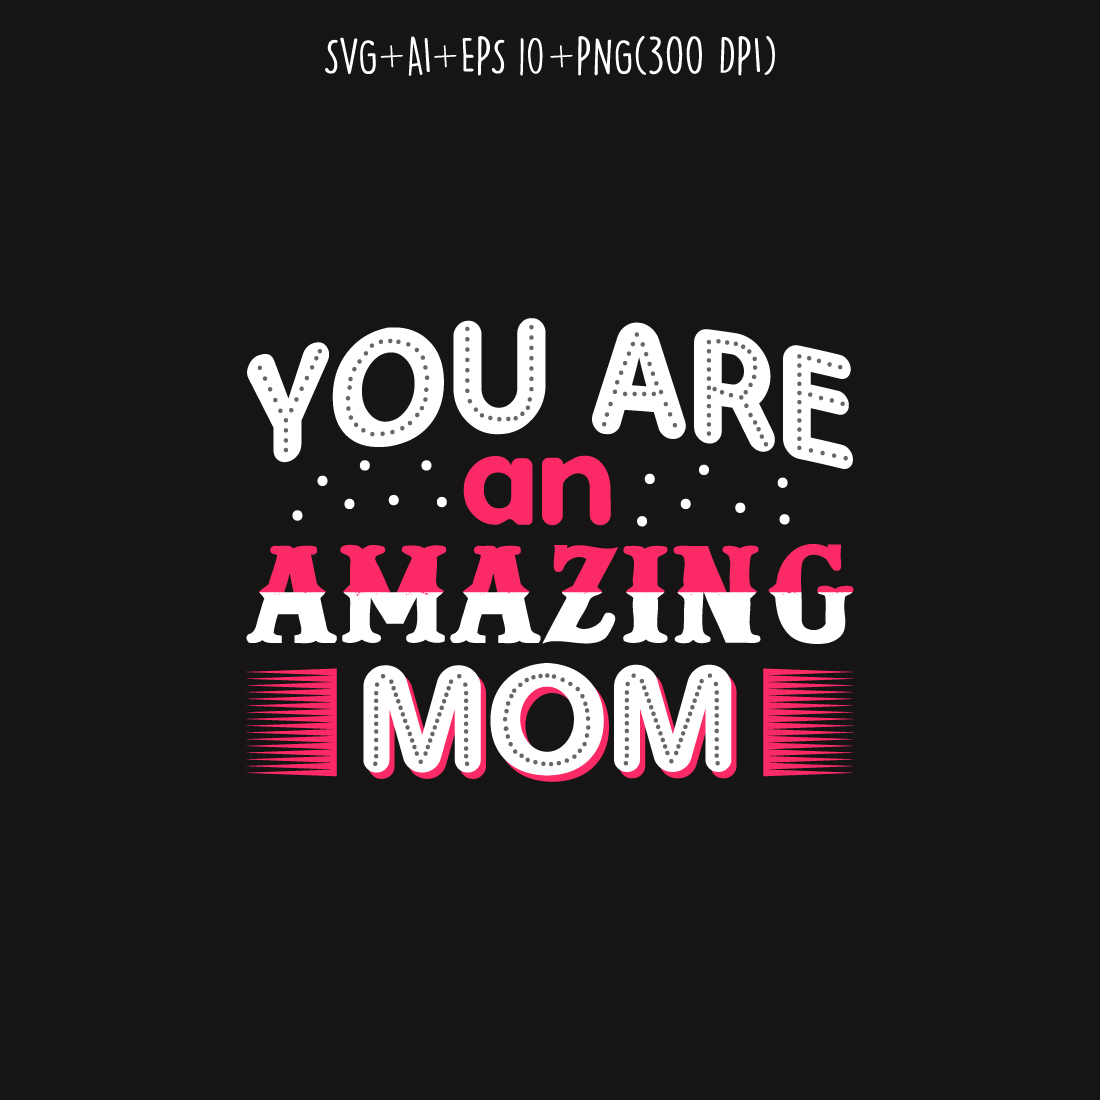 You are my amazing mom design for t-shirts, cards, frame artwork, phone cases, bags, mugs, stickers, tumblers, print, etc preview image.